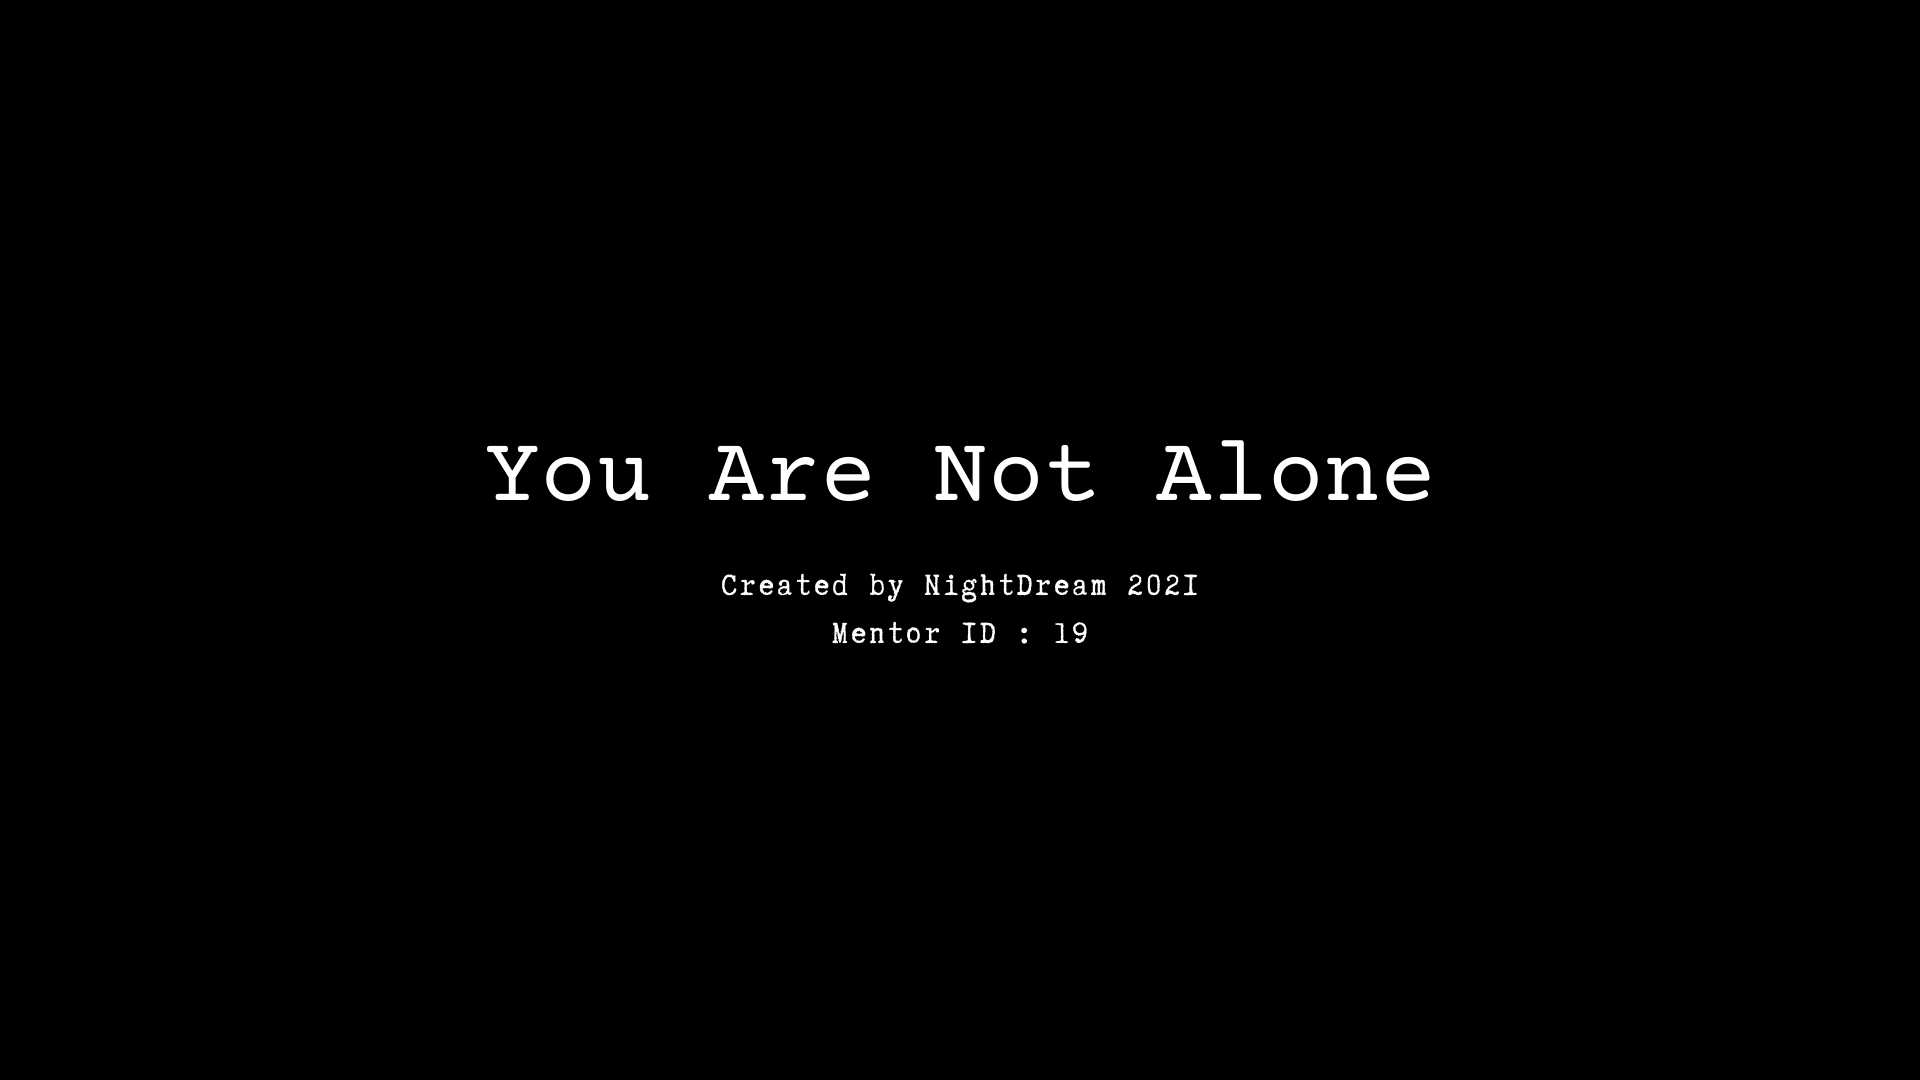 19 - You Are Not Alone